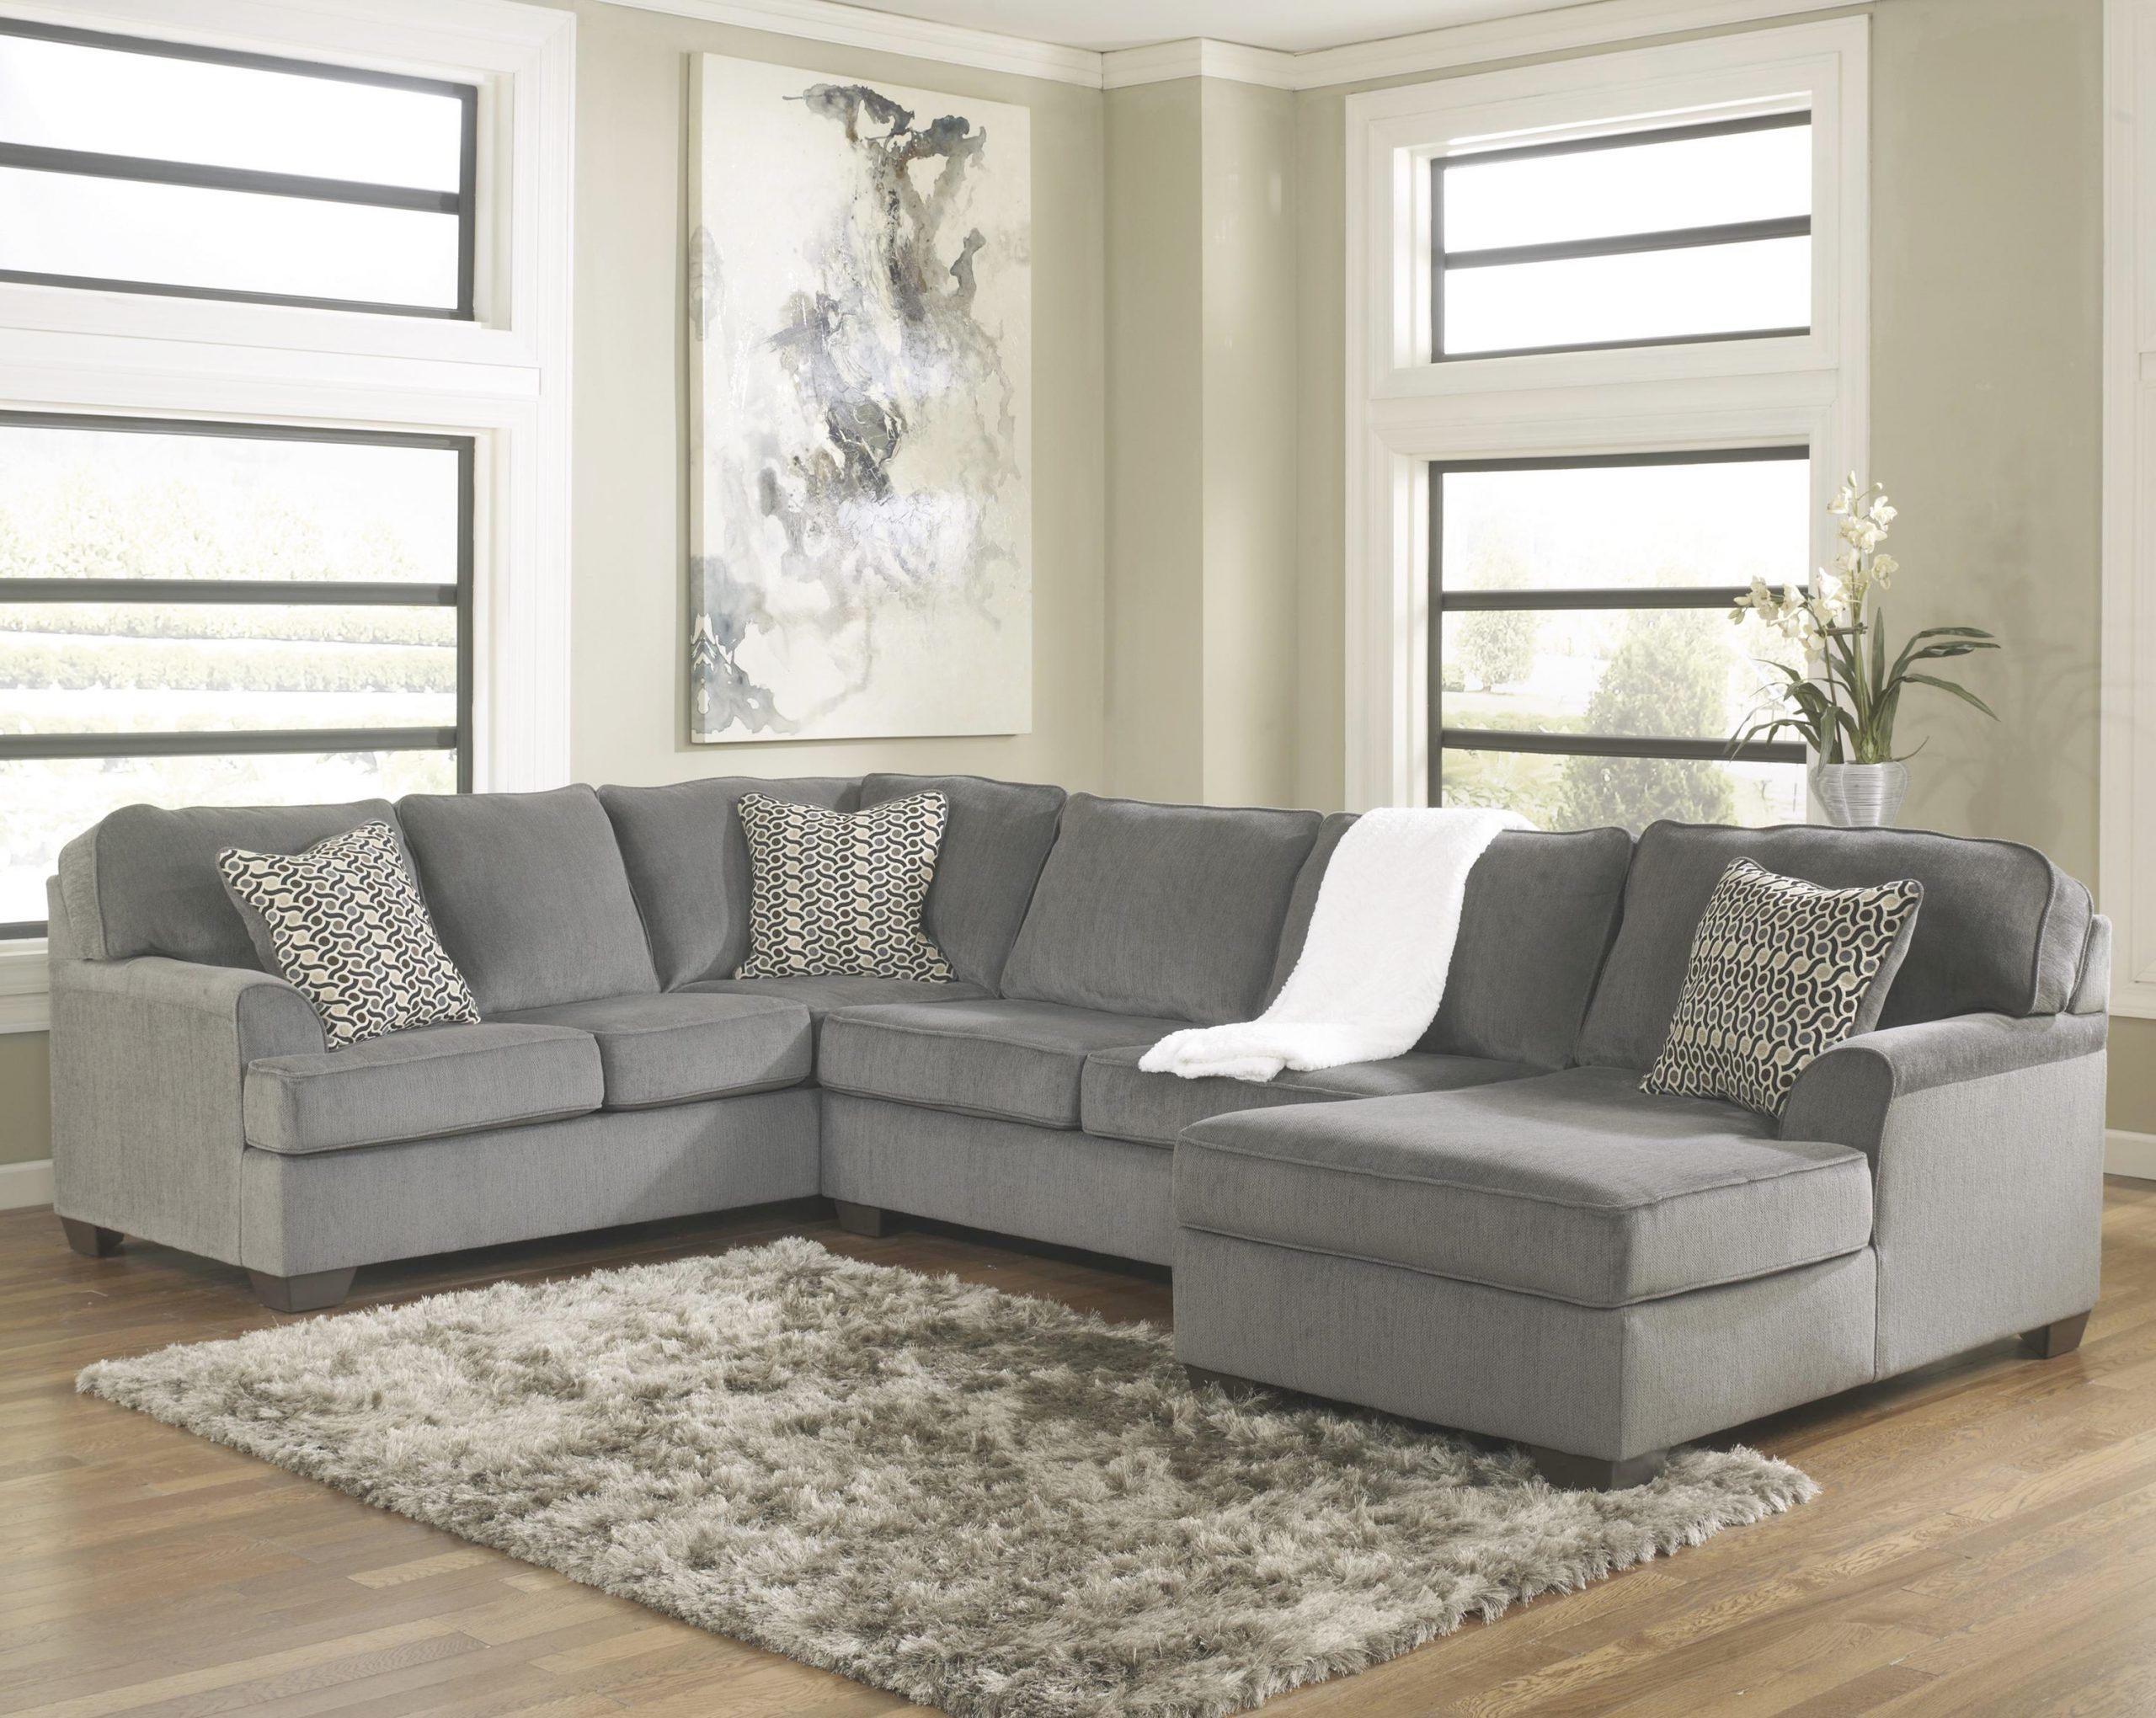 Ashley Furniture Loric – Smoke Contemporary 3 Piece Sectional With For Green Bay Wi Sectional Sofas (View 5 of 10)